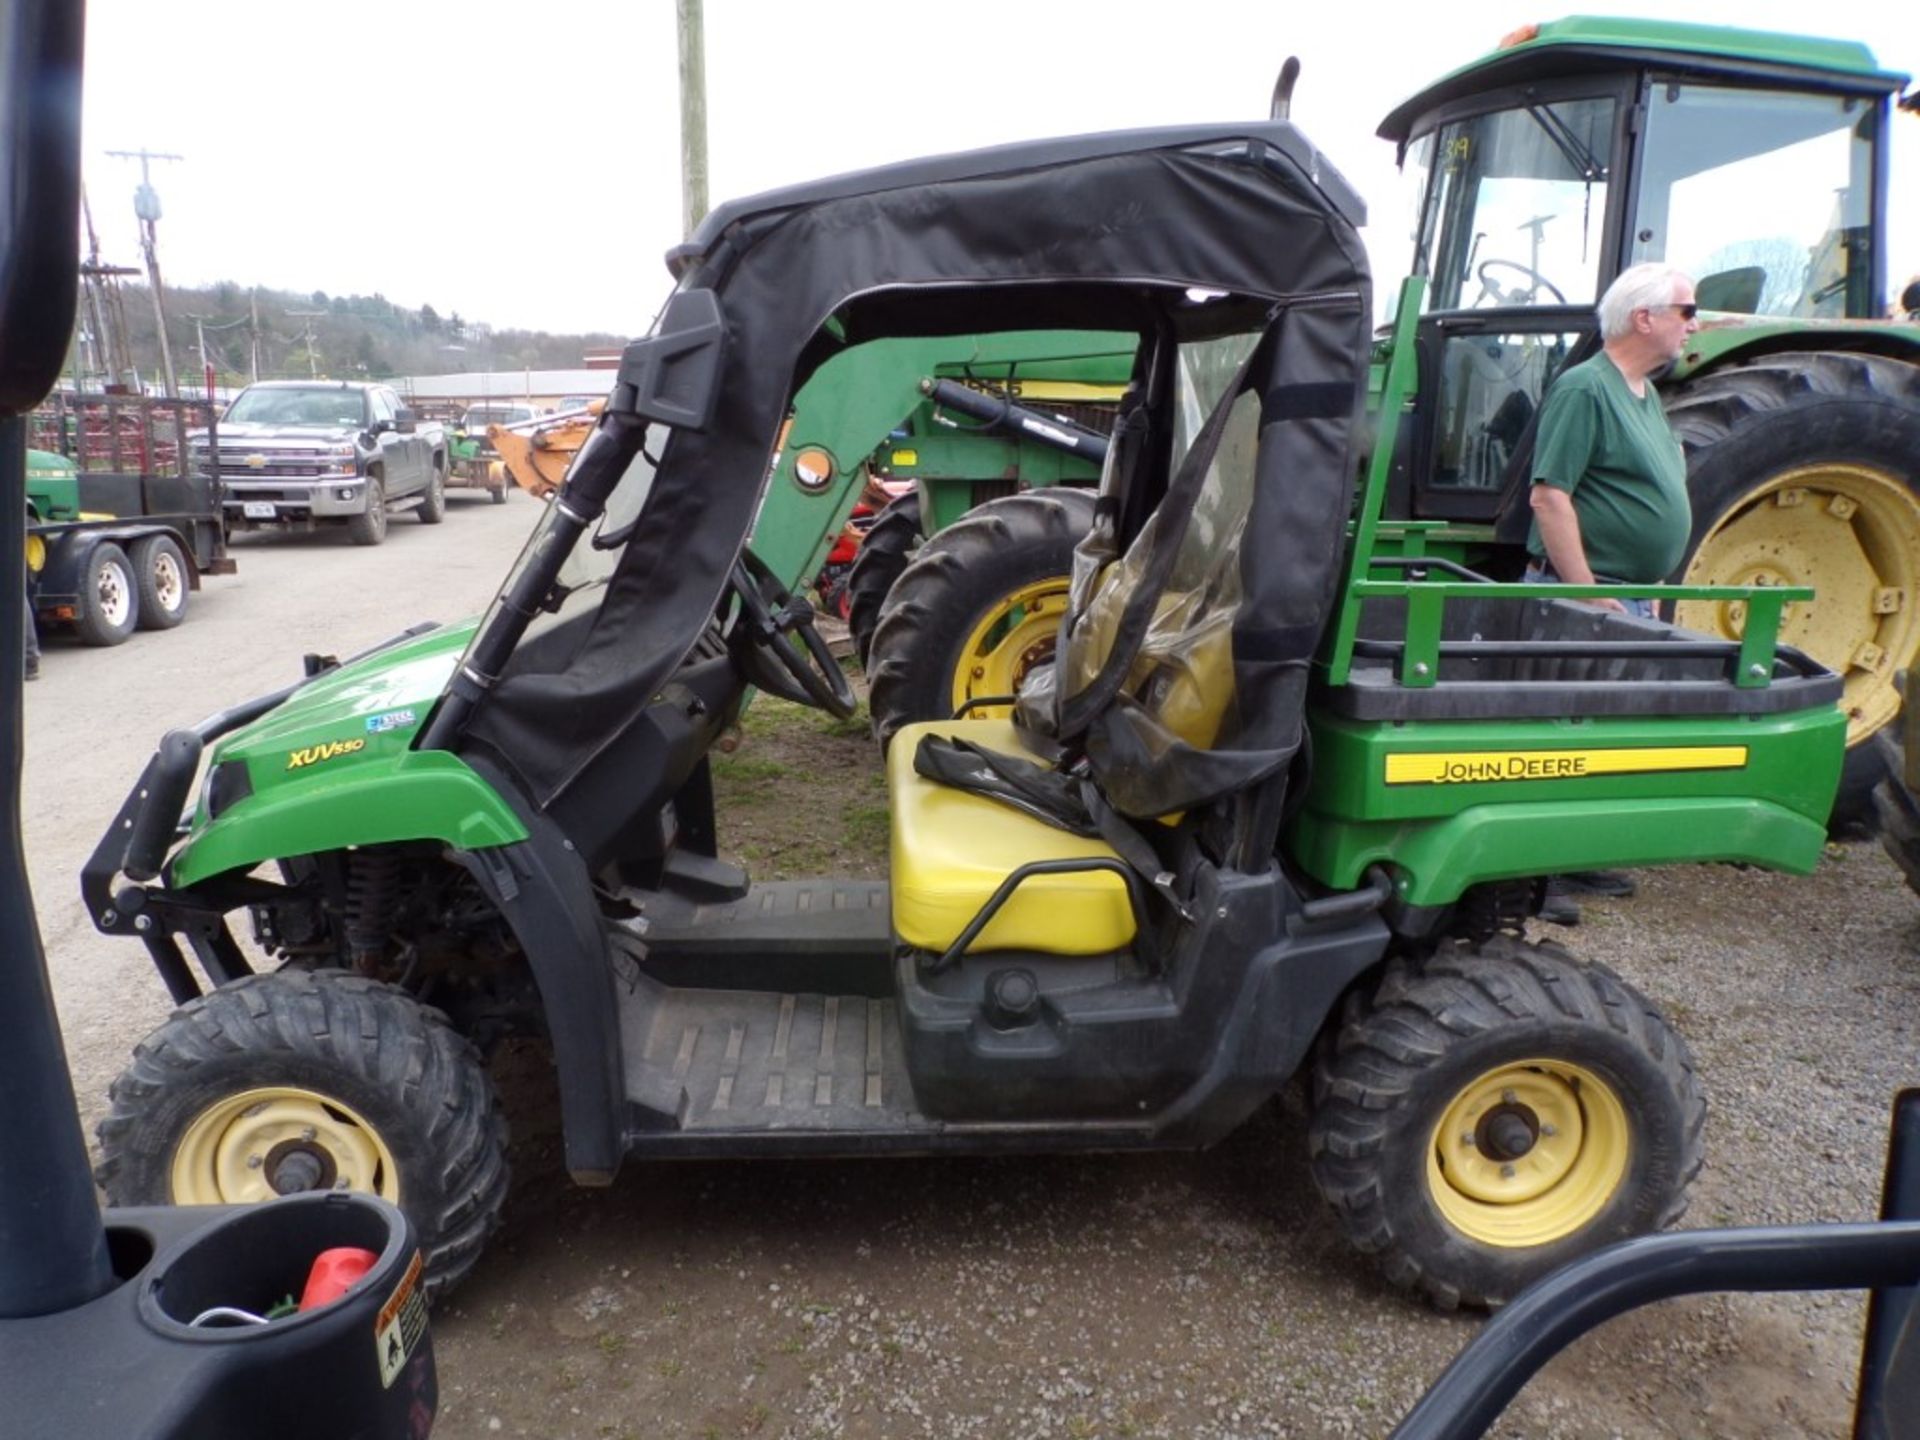 John Deere XUV-550 UTV with Canopy and Windshield, 4 WD, 395 Hrs., Super Nice, Ser.# 004802 (4365)